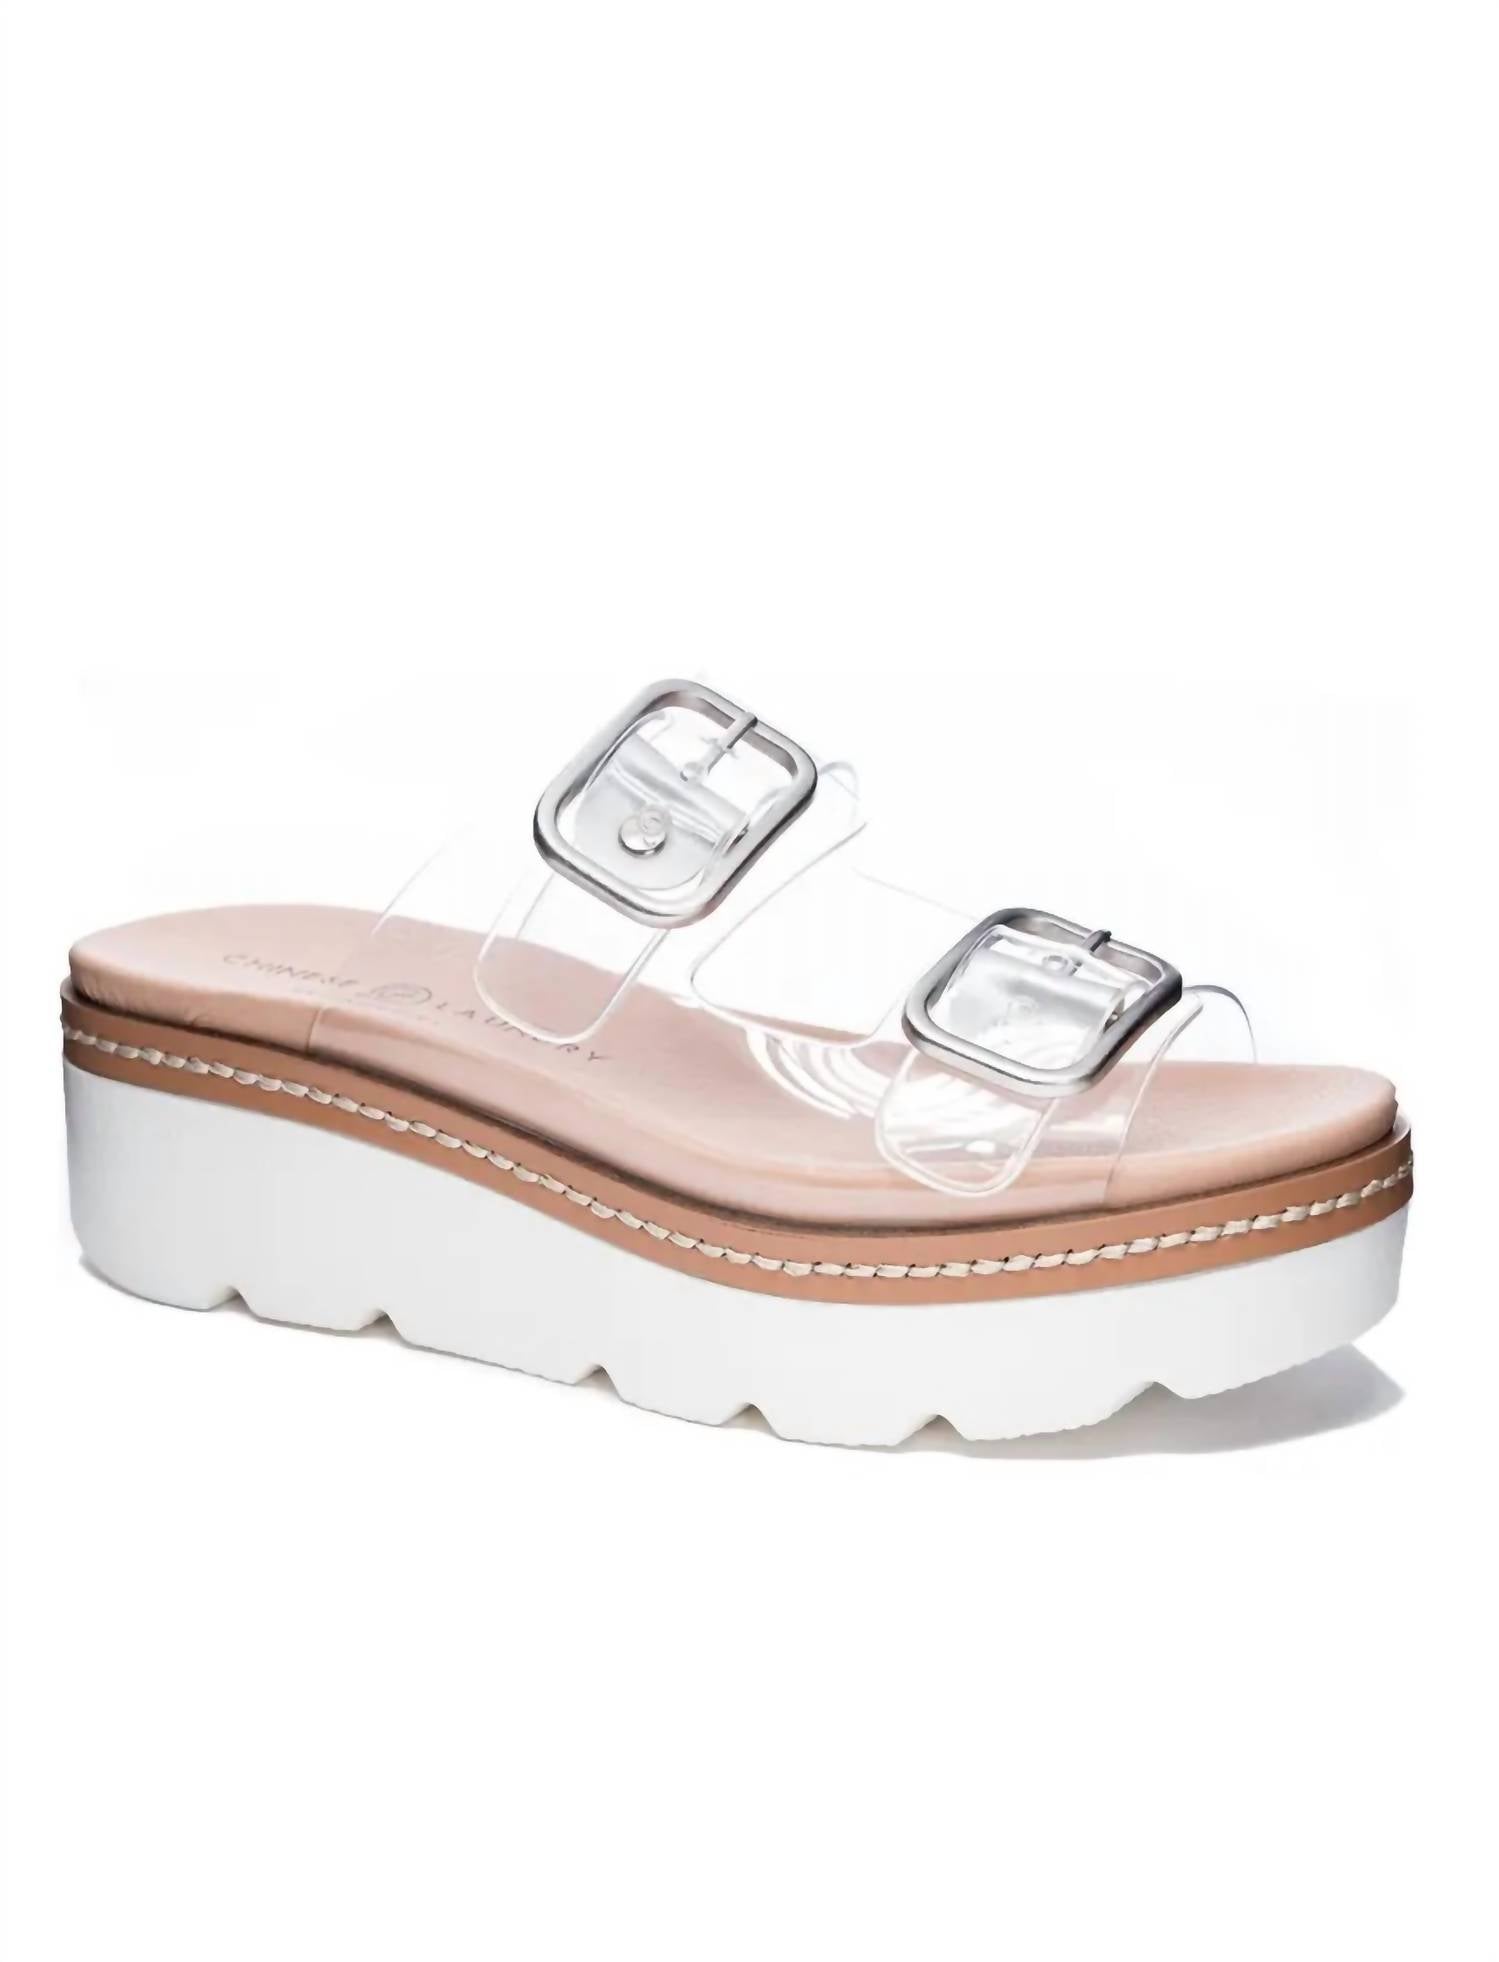 CHINESE LAUNDRY Surfs Up Platform Sandal in Vinyl Clear